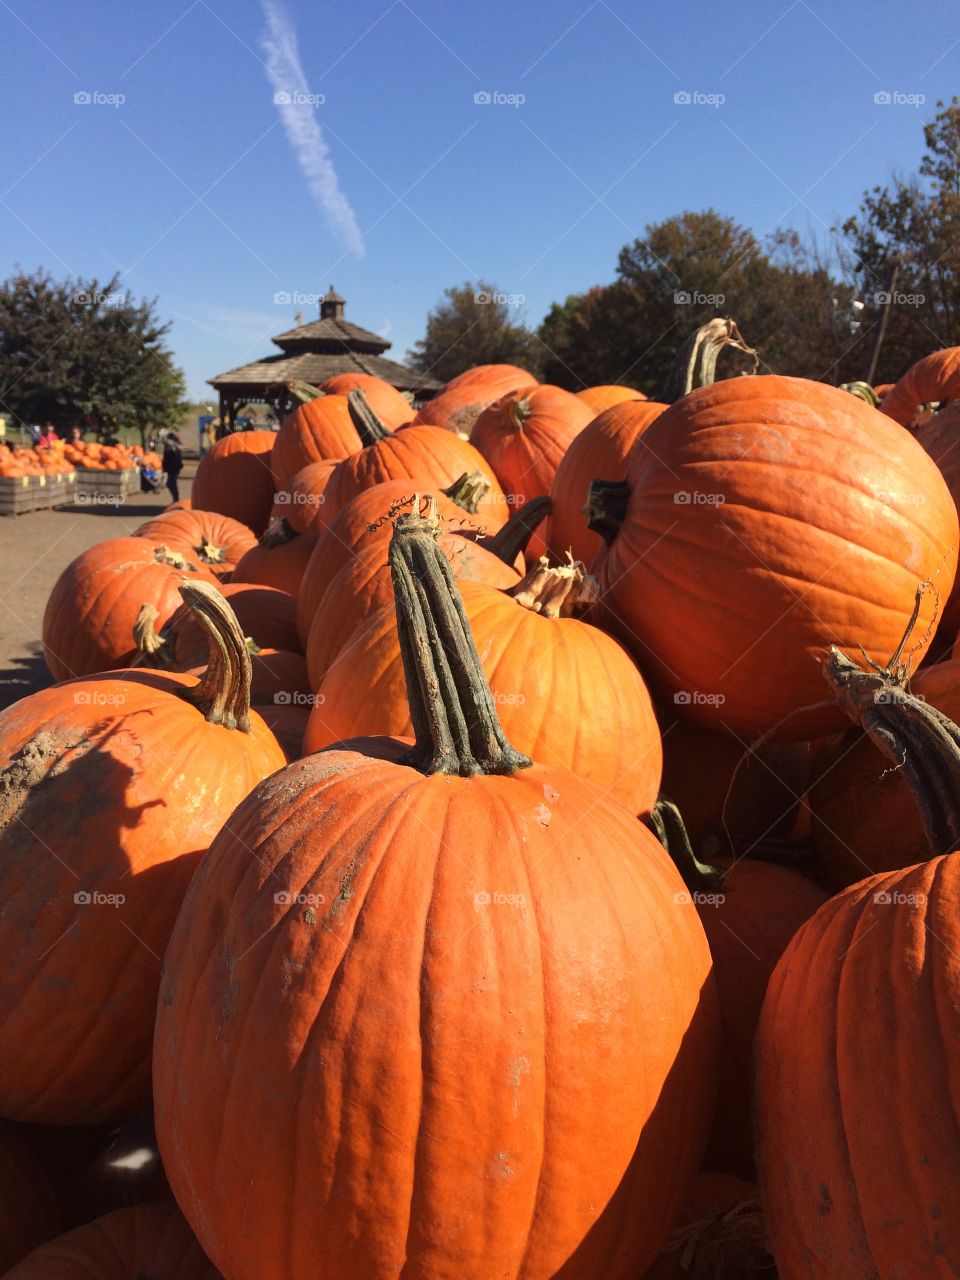 Pumpkins by the thousands. Blue skies at the pumpkin patch on a beautiful autumn day.